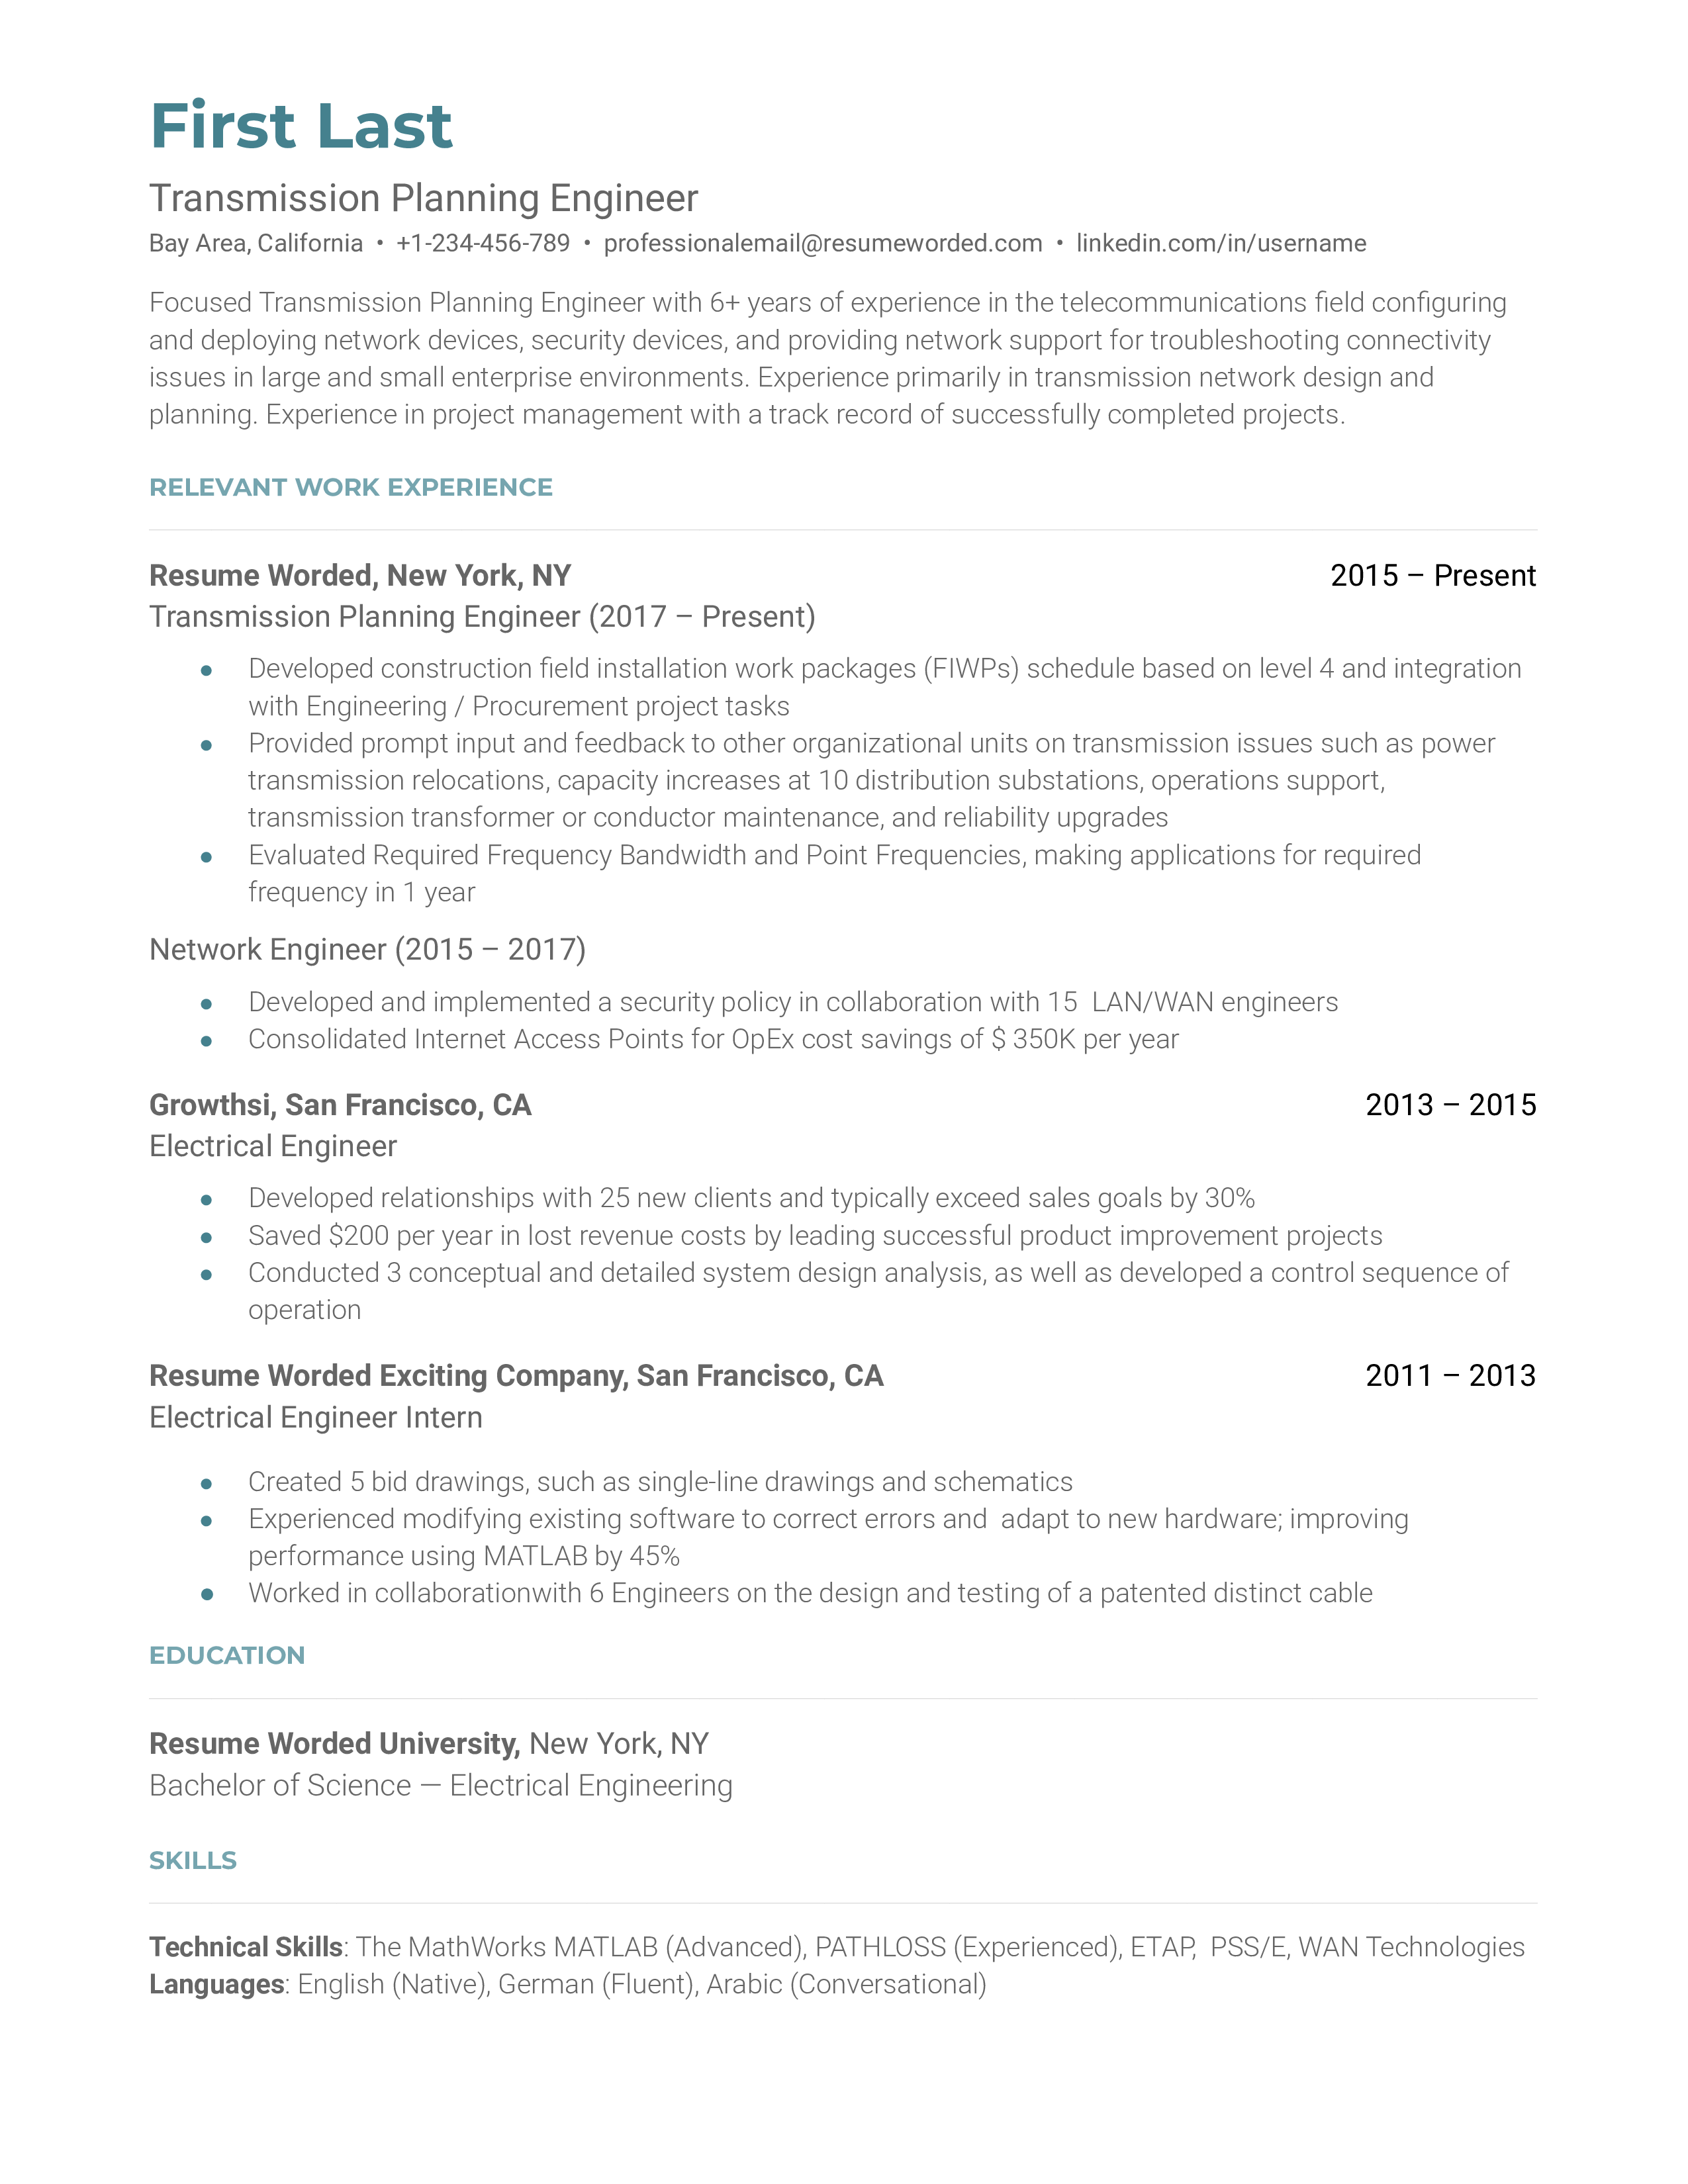 A transmission planning engineer resume template that has a professional description and chronologically organized work history.